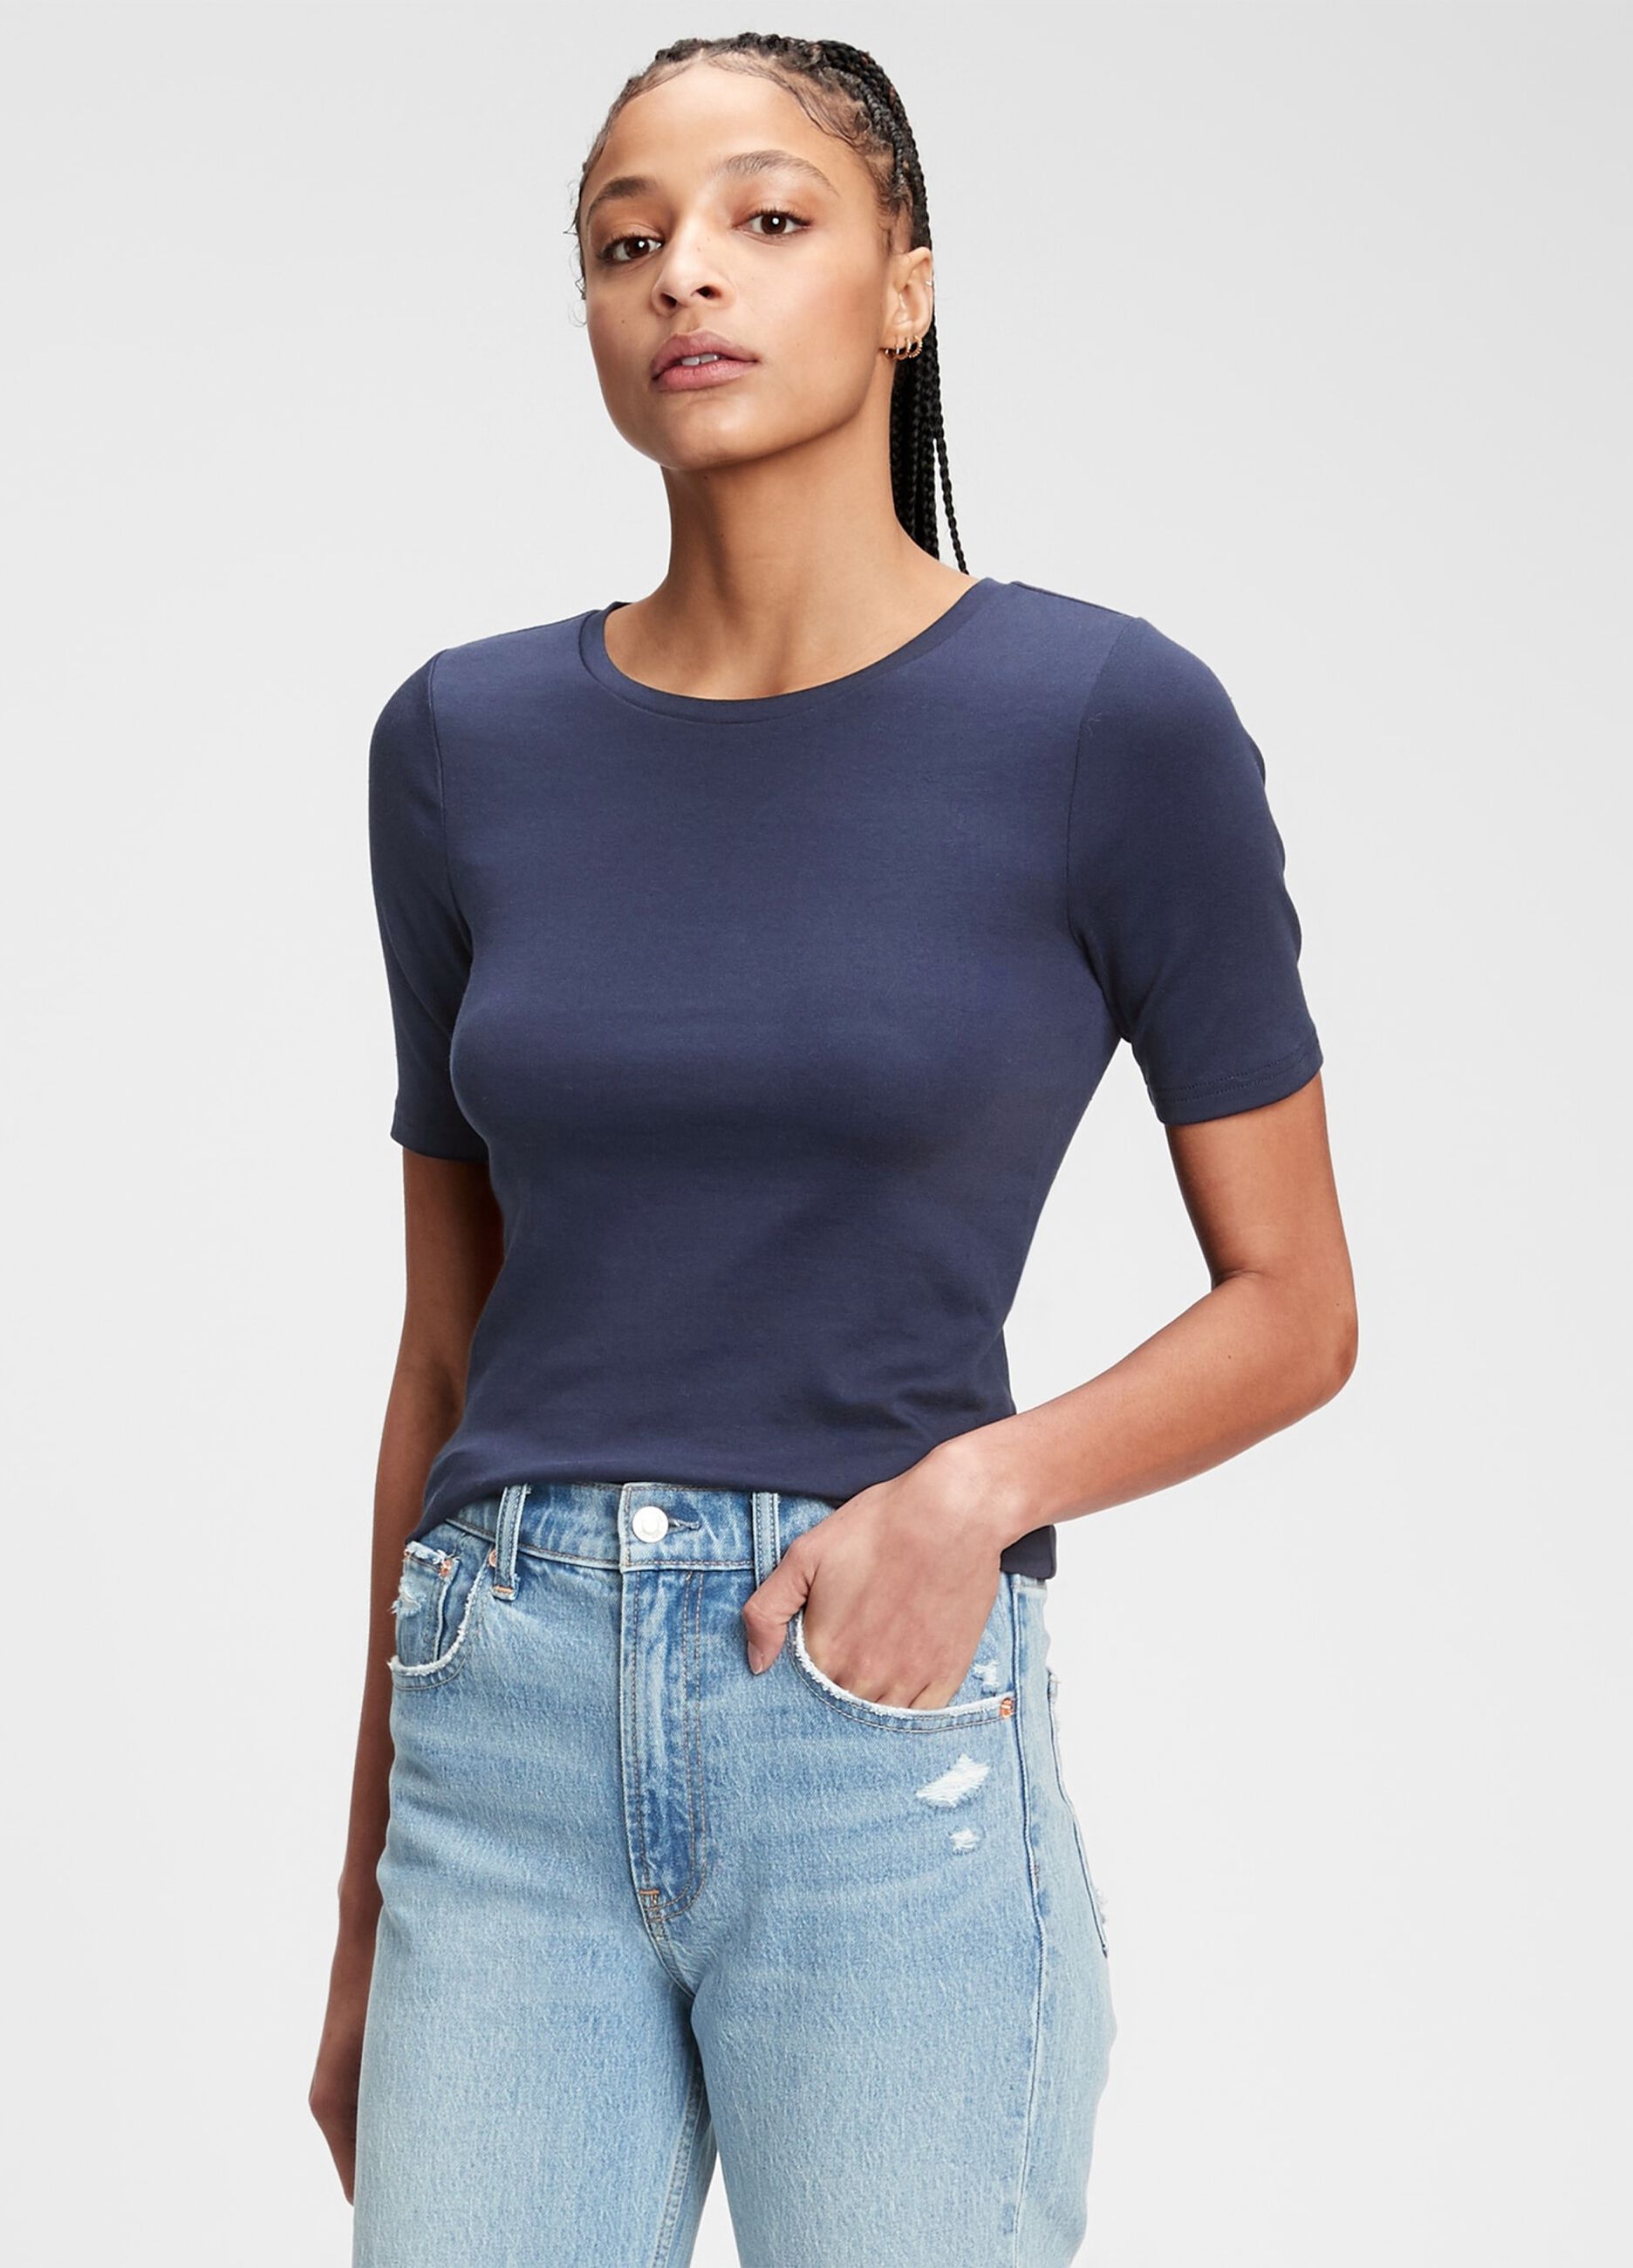 Round-neck t-shirt in stretch cotton and modal